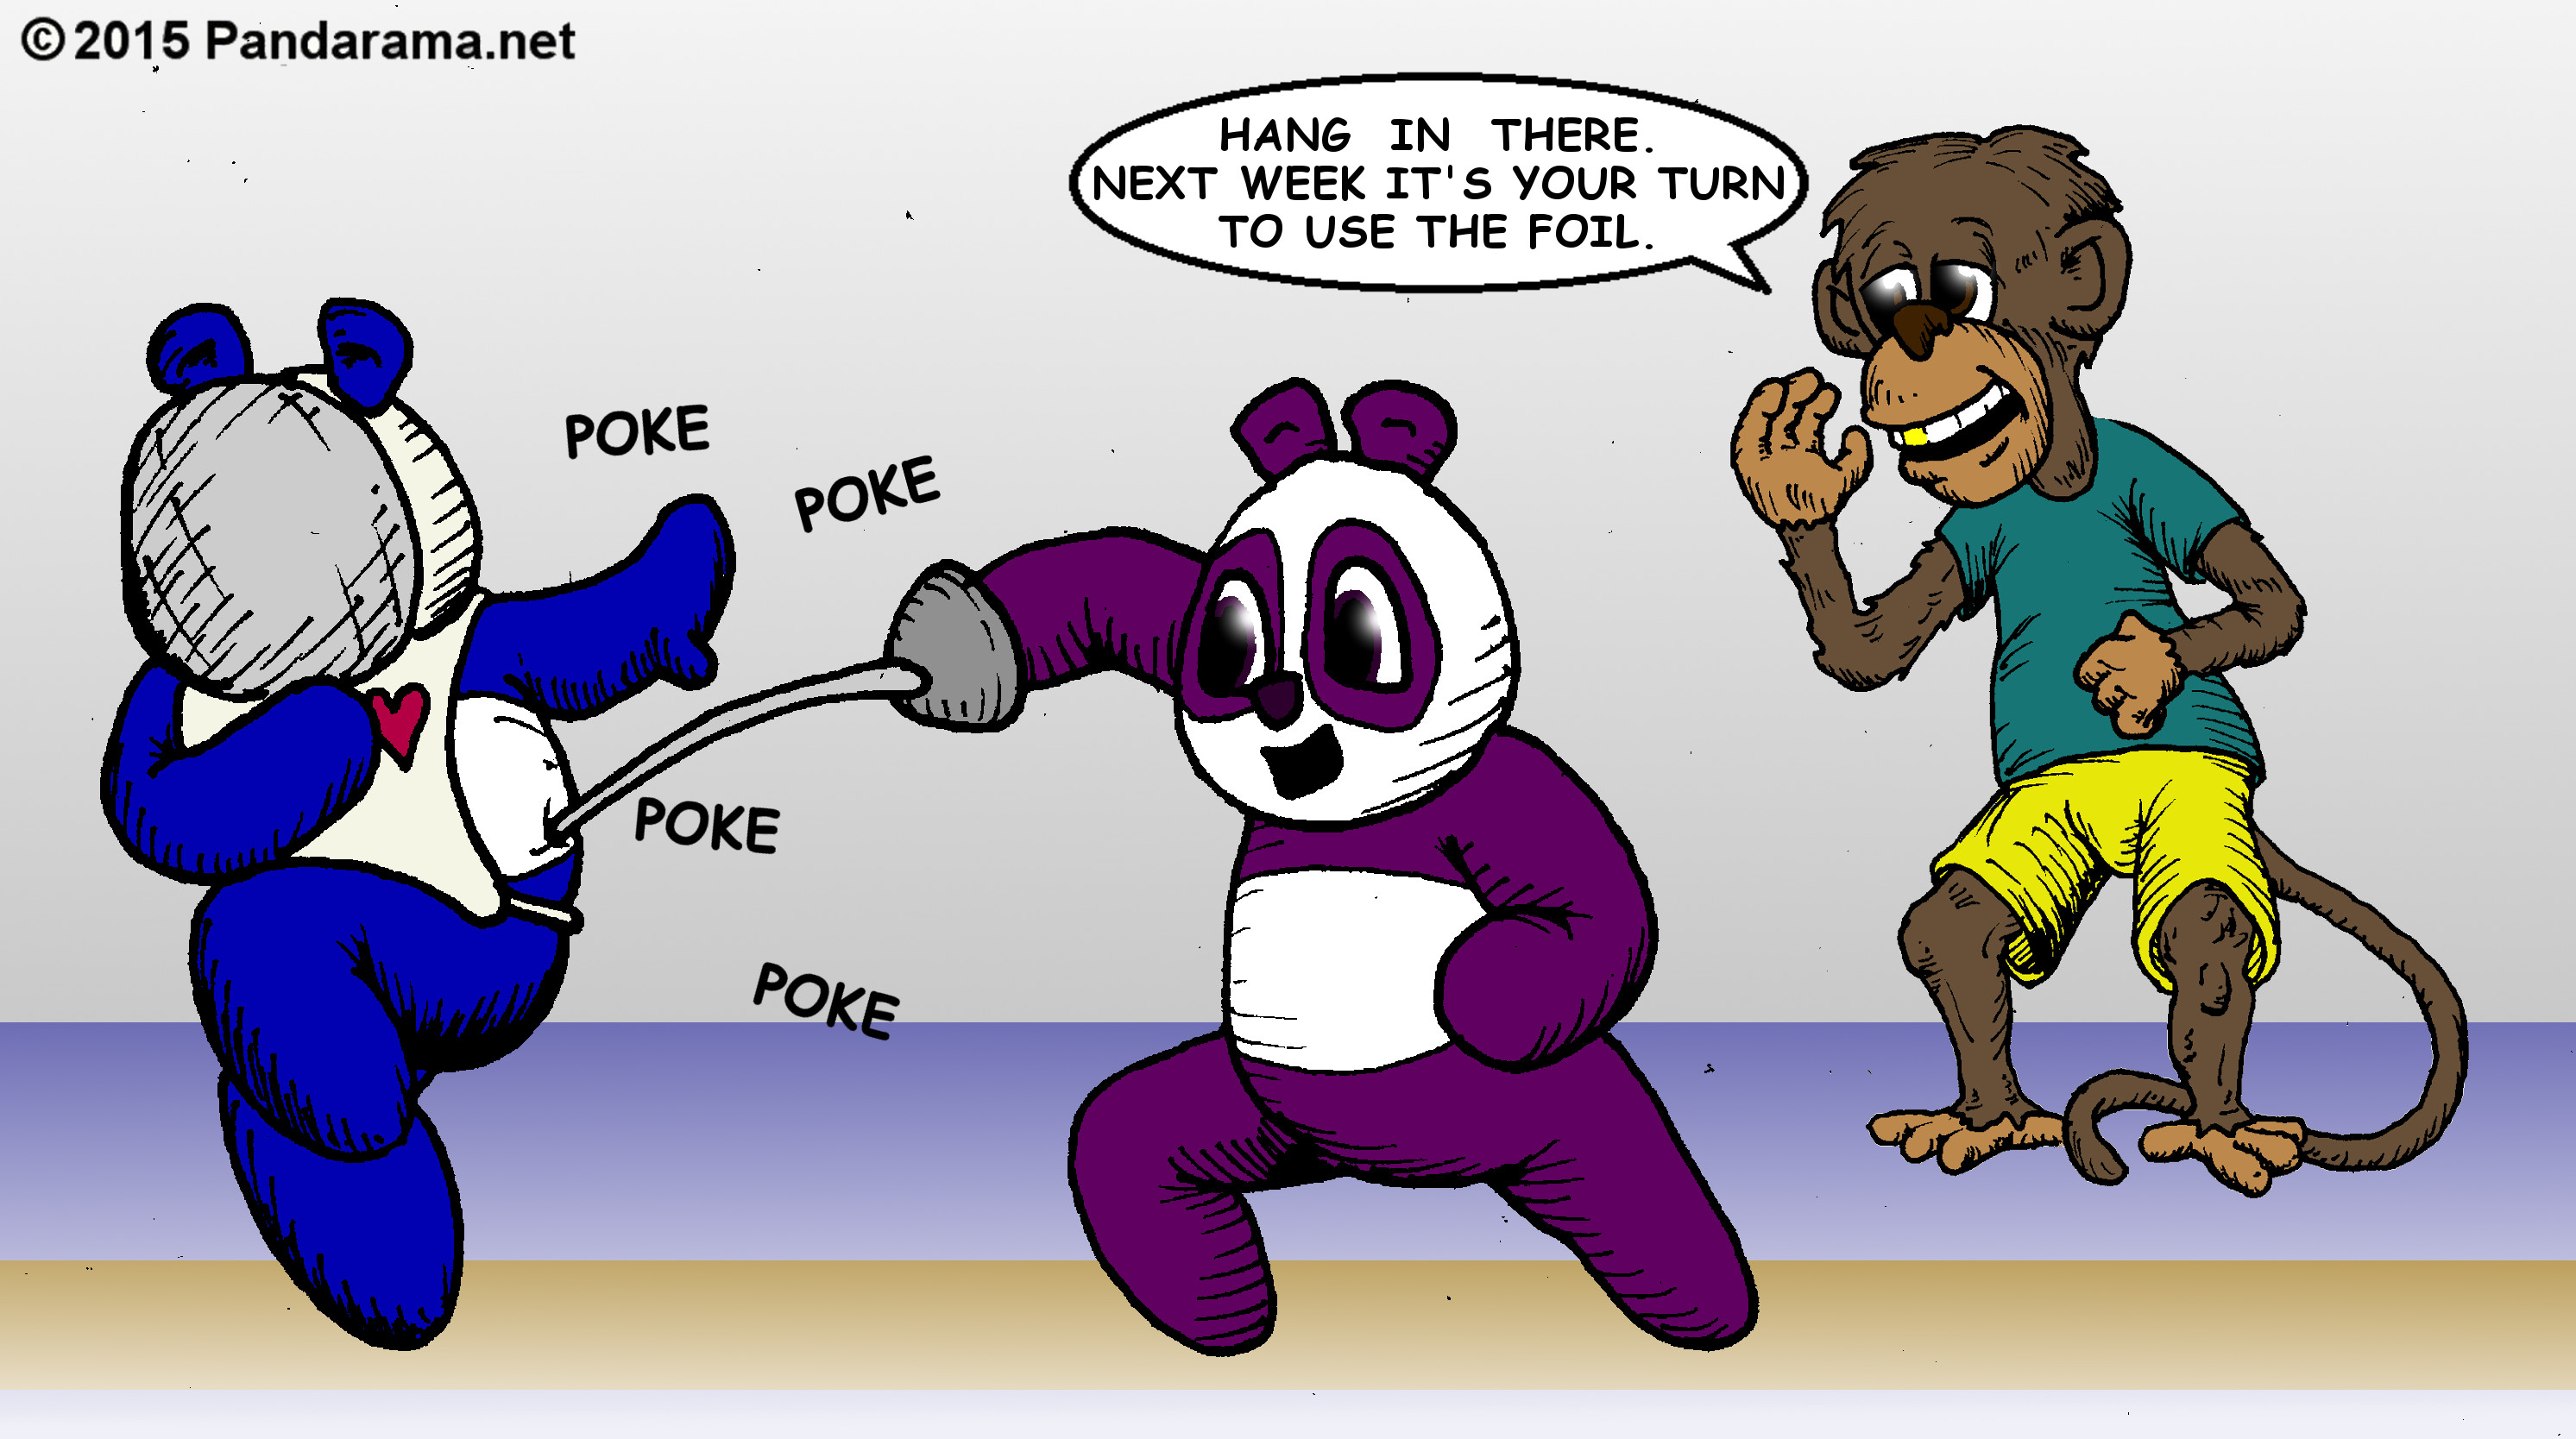 fencing cartoon. sword fighting cartoon. epee cartoon. fencing maestro. poke. pokey. poking. Cartoon where panda repeatedly pokes another panda with fencing foil, and the coach encourages the panda being poked to hang in there, because it'll be that panda's turn to do the poking next week. budget fencing.